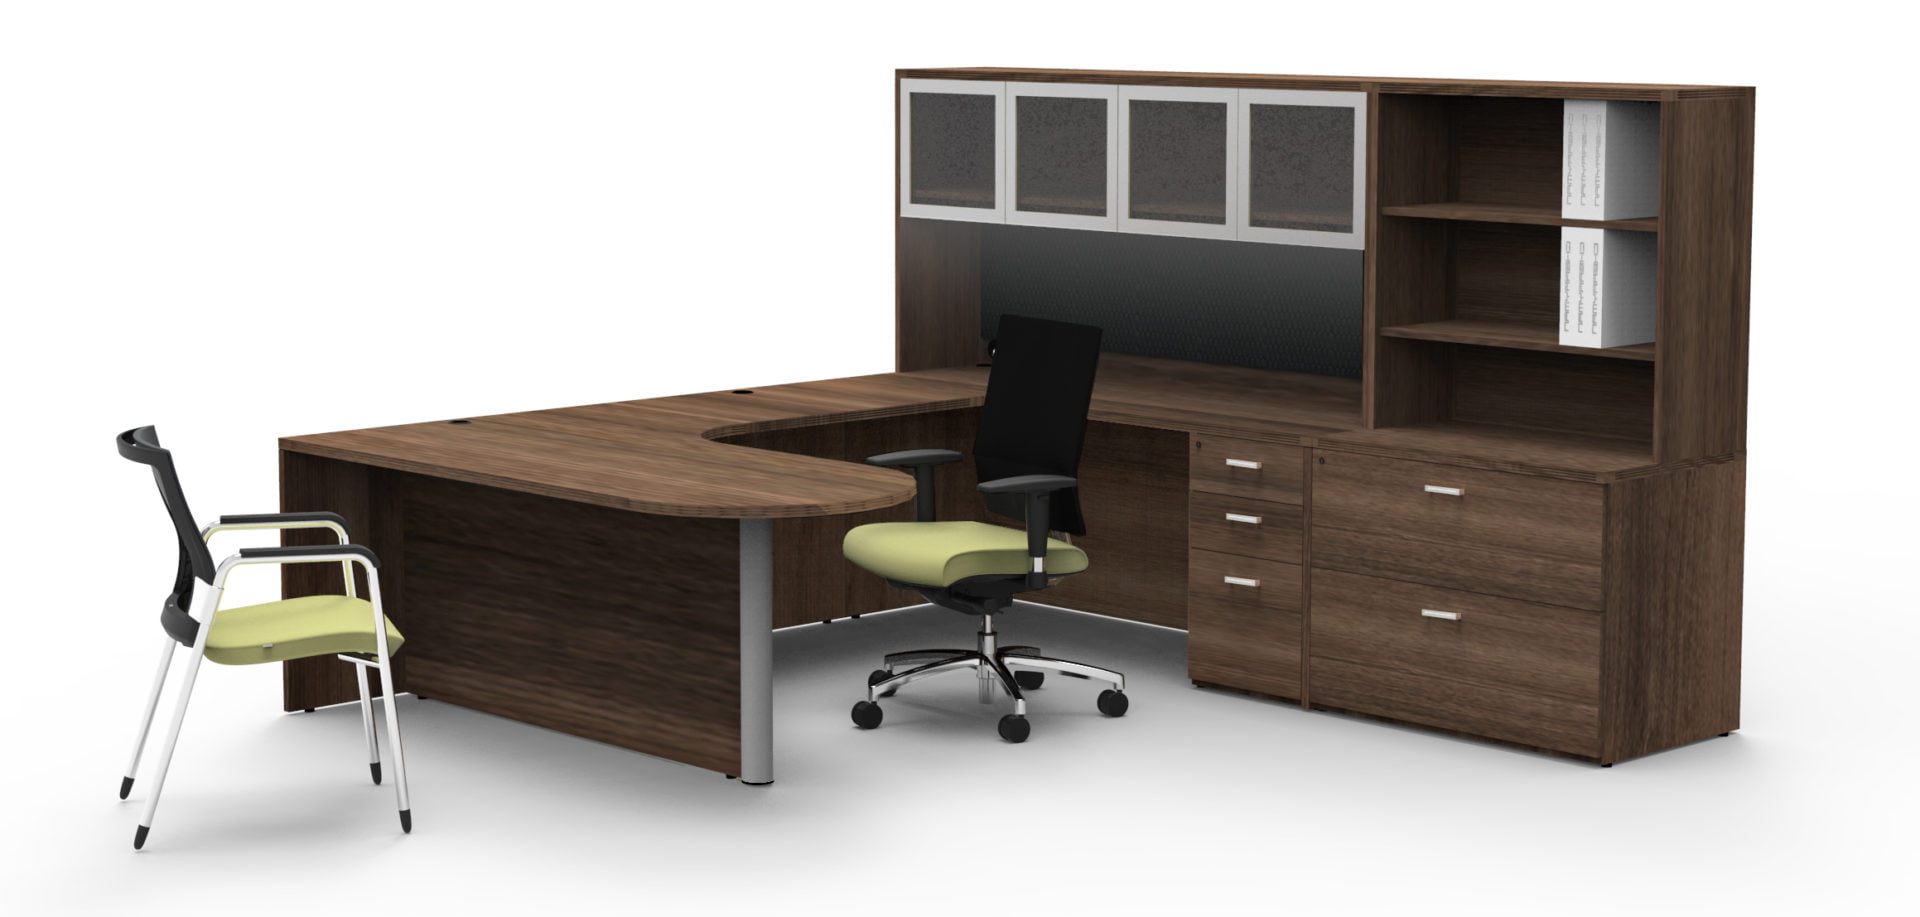 Affordable Office Furniture Near Me | Office Furniture